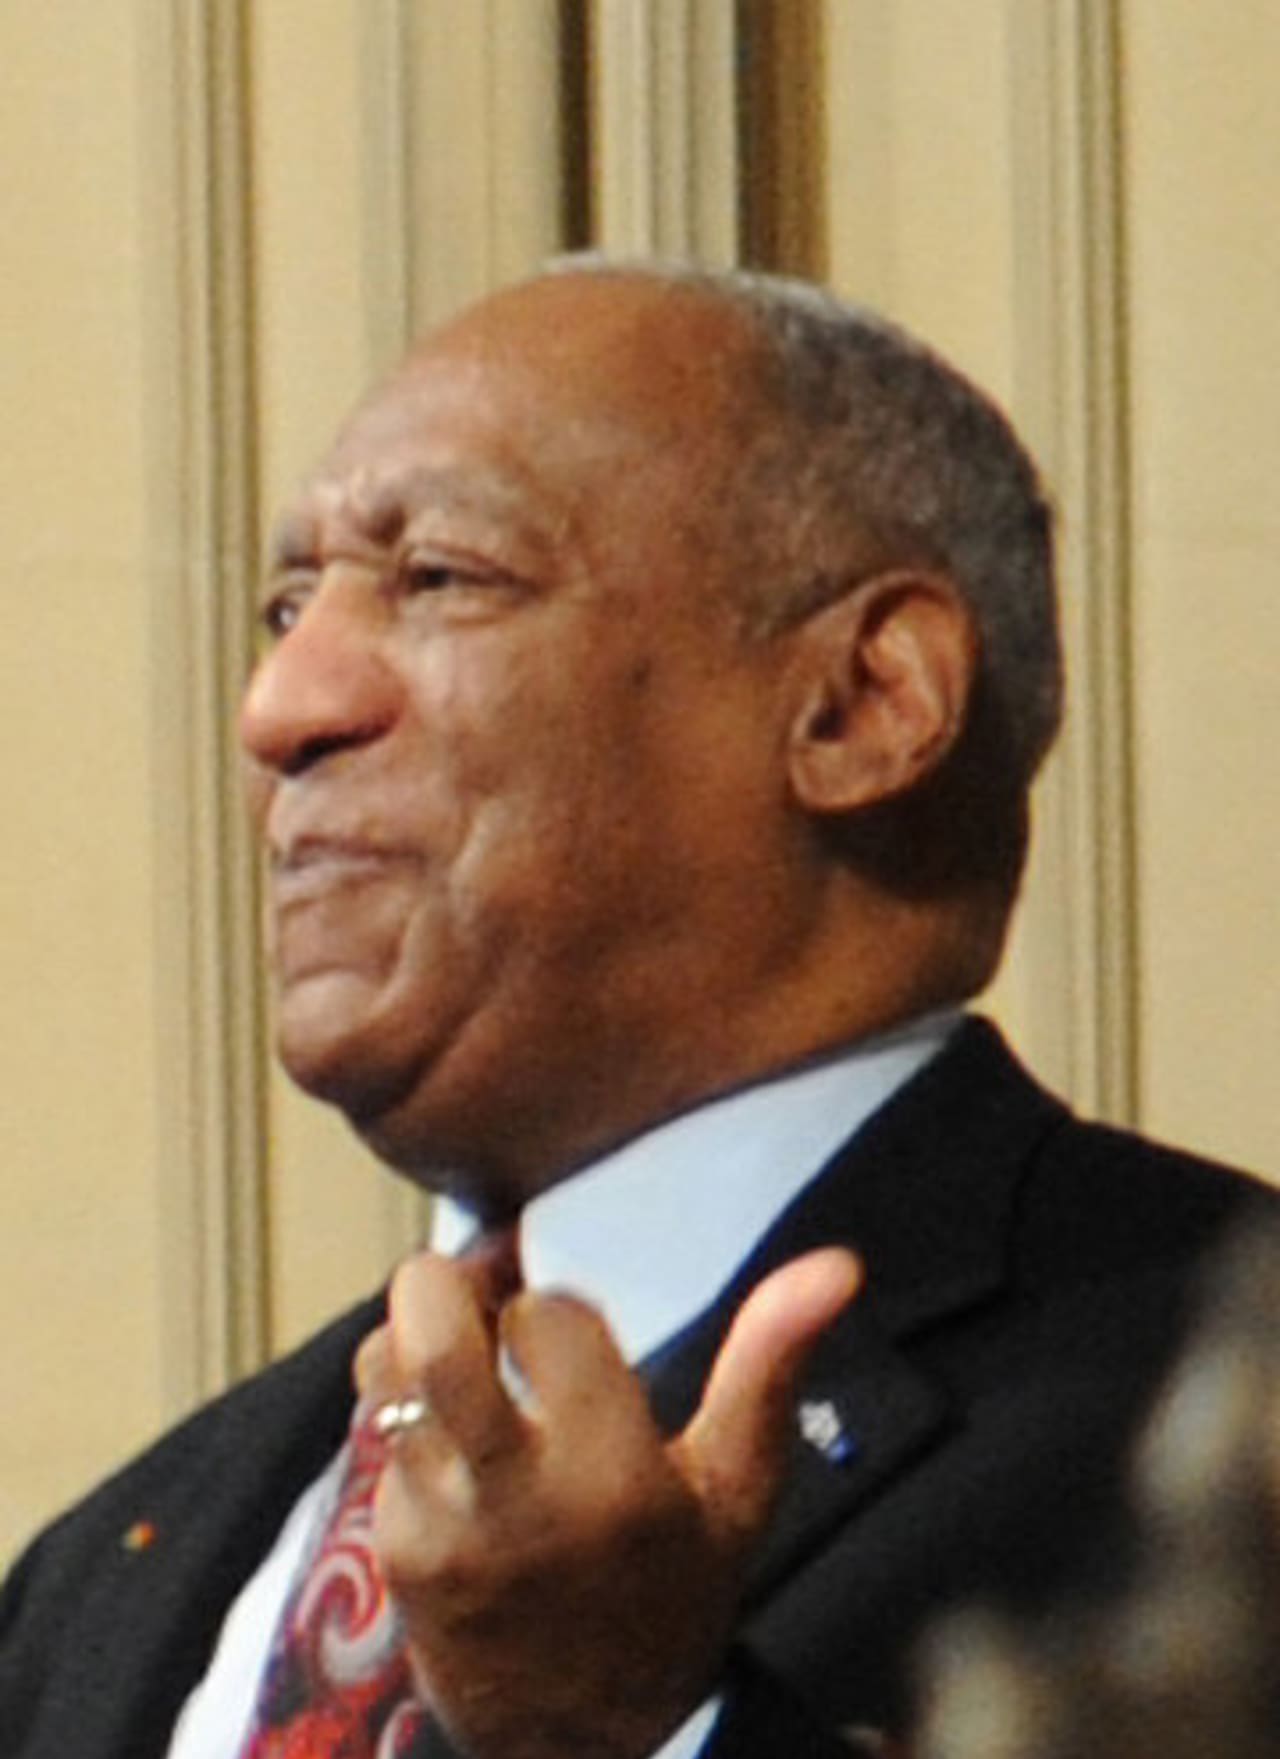 Bill Cosby's shows in Tarrytown are still scheduled despite sex abuse allegations. 